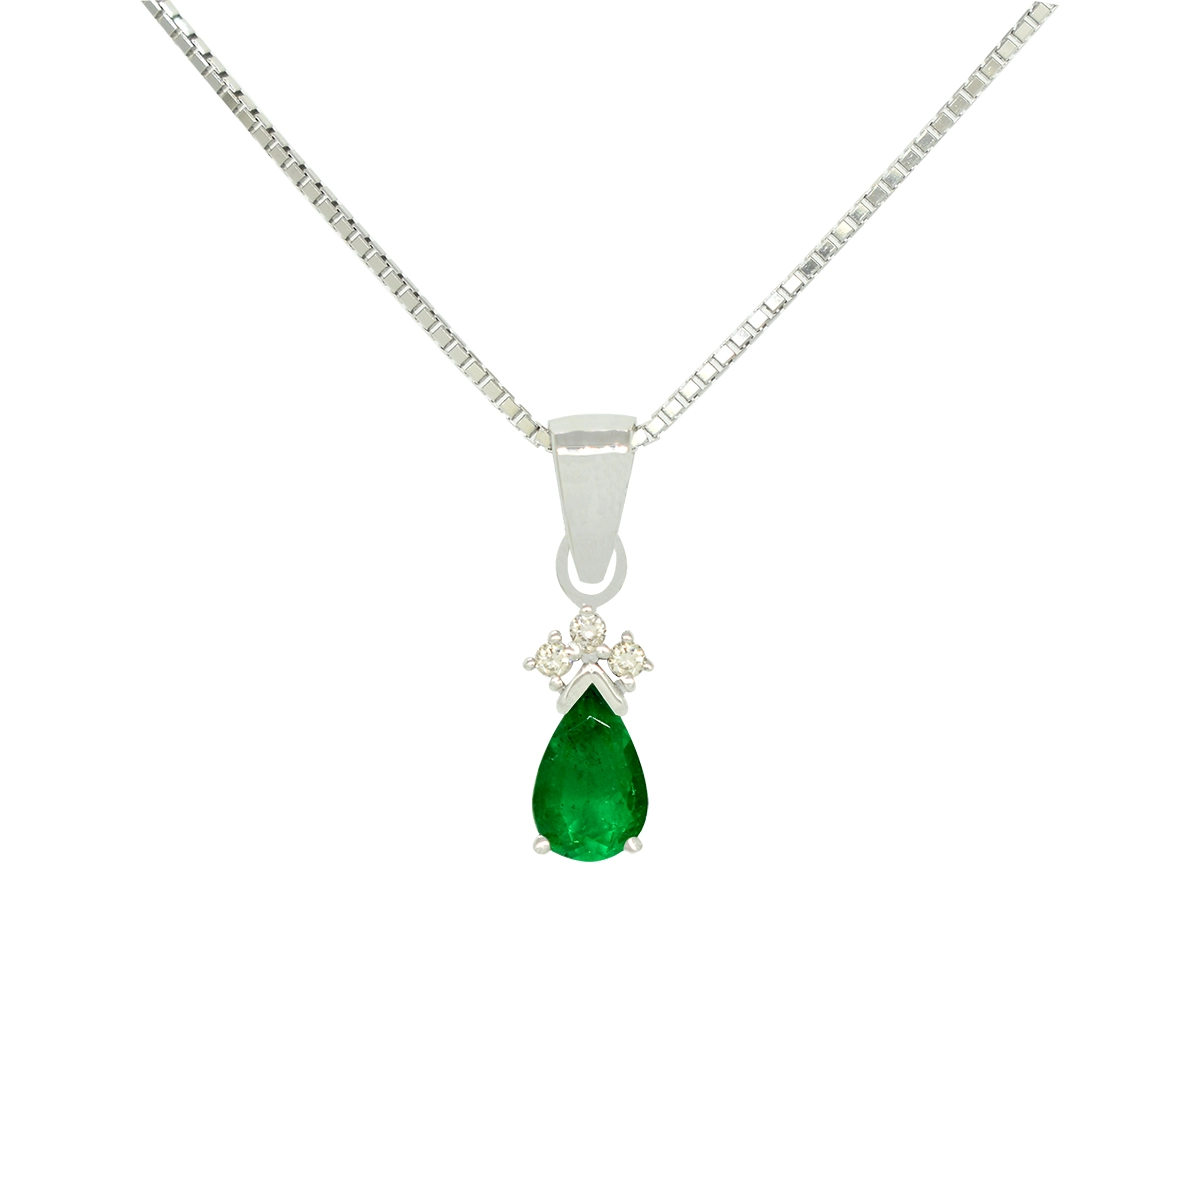 Small Pear Shaped Emerald and Diamond Pendant in 18K White Gold